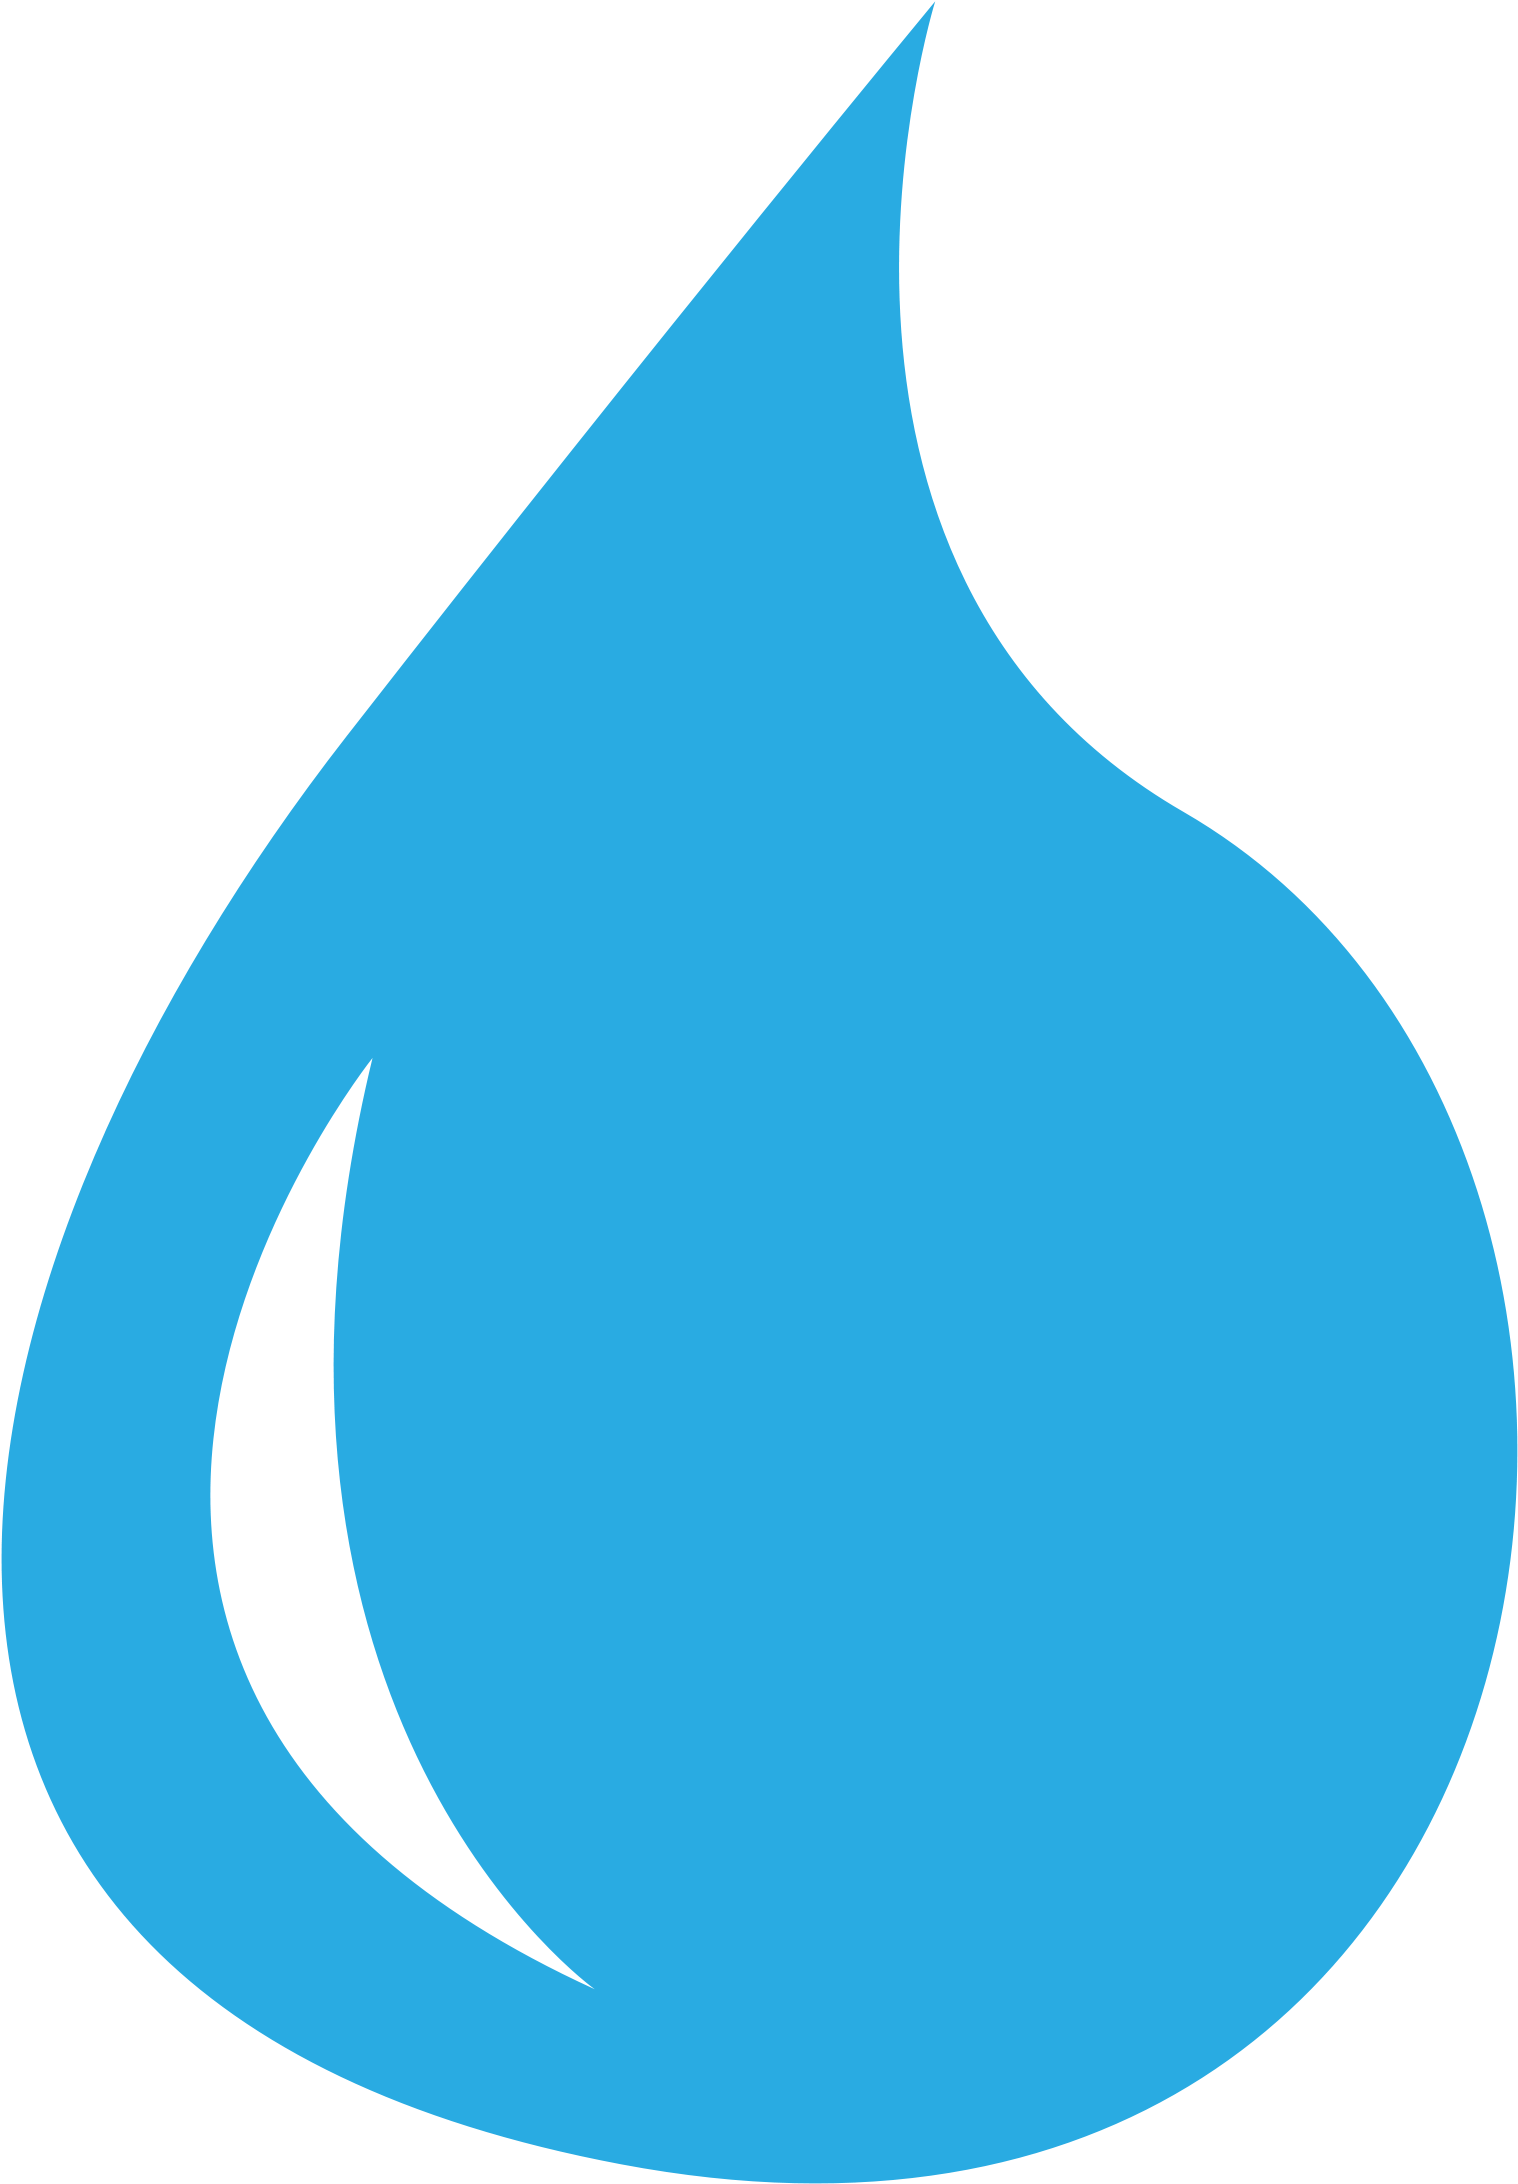 Water - Water Droplet Clipart Png (1669x2400)